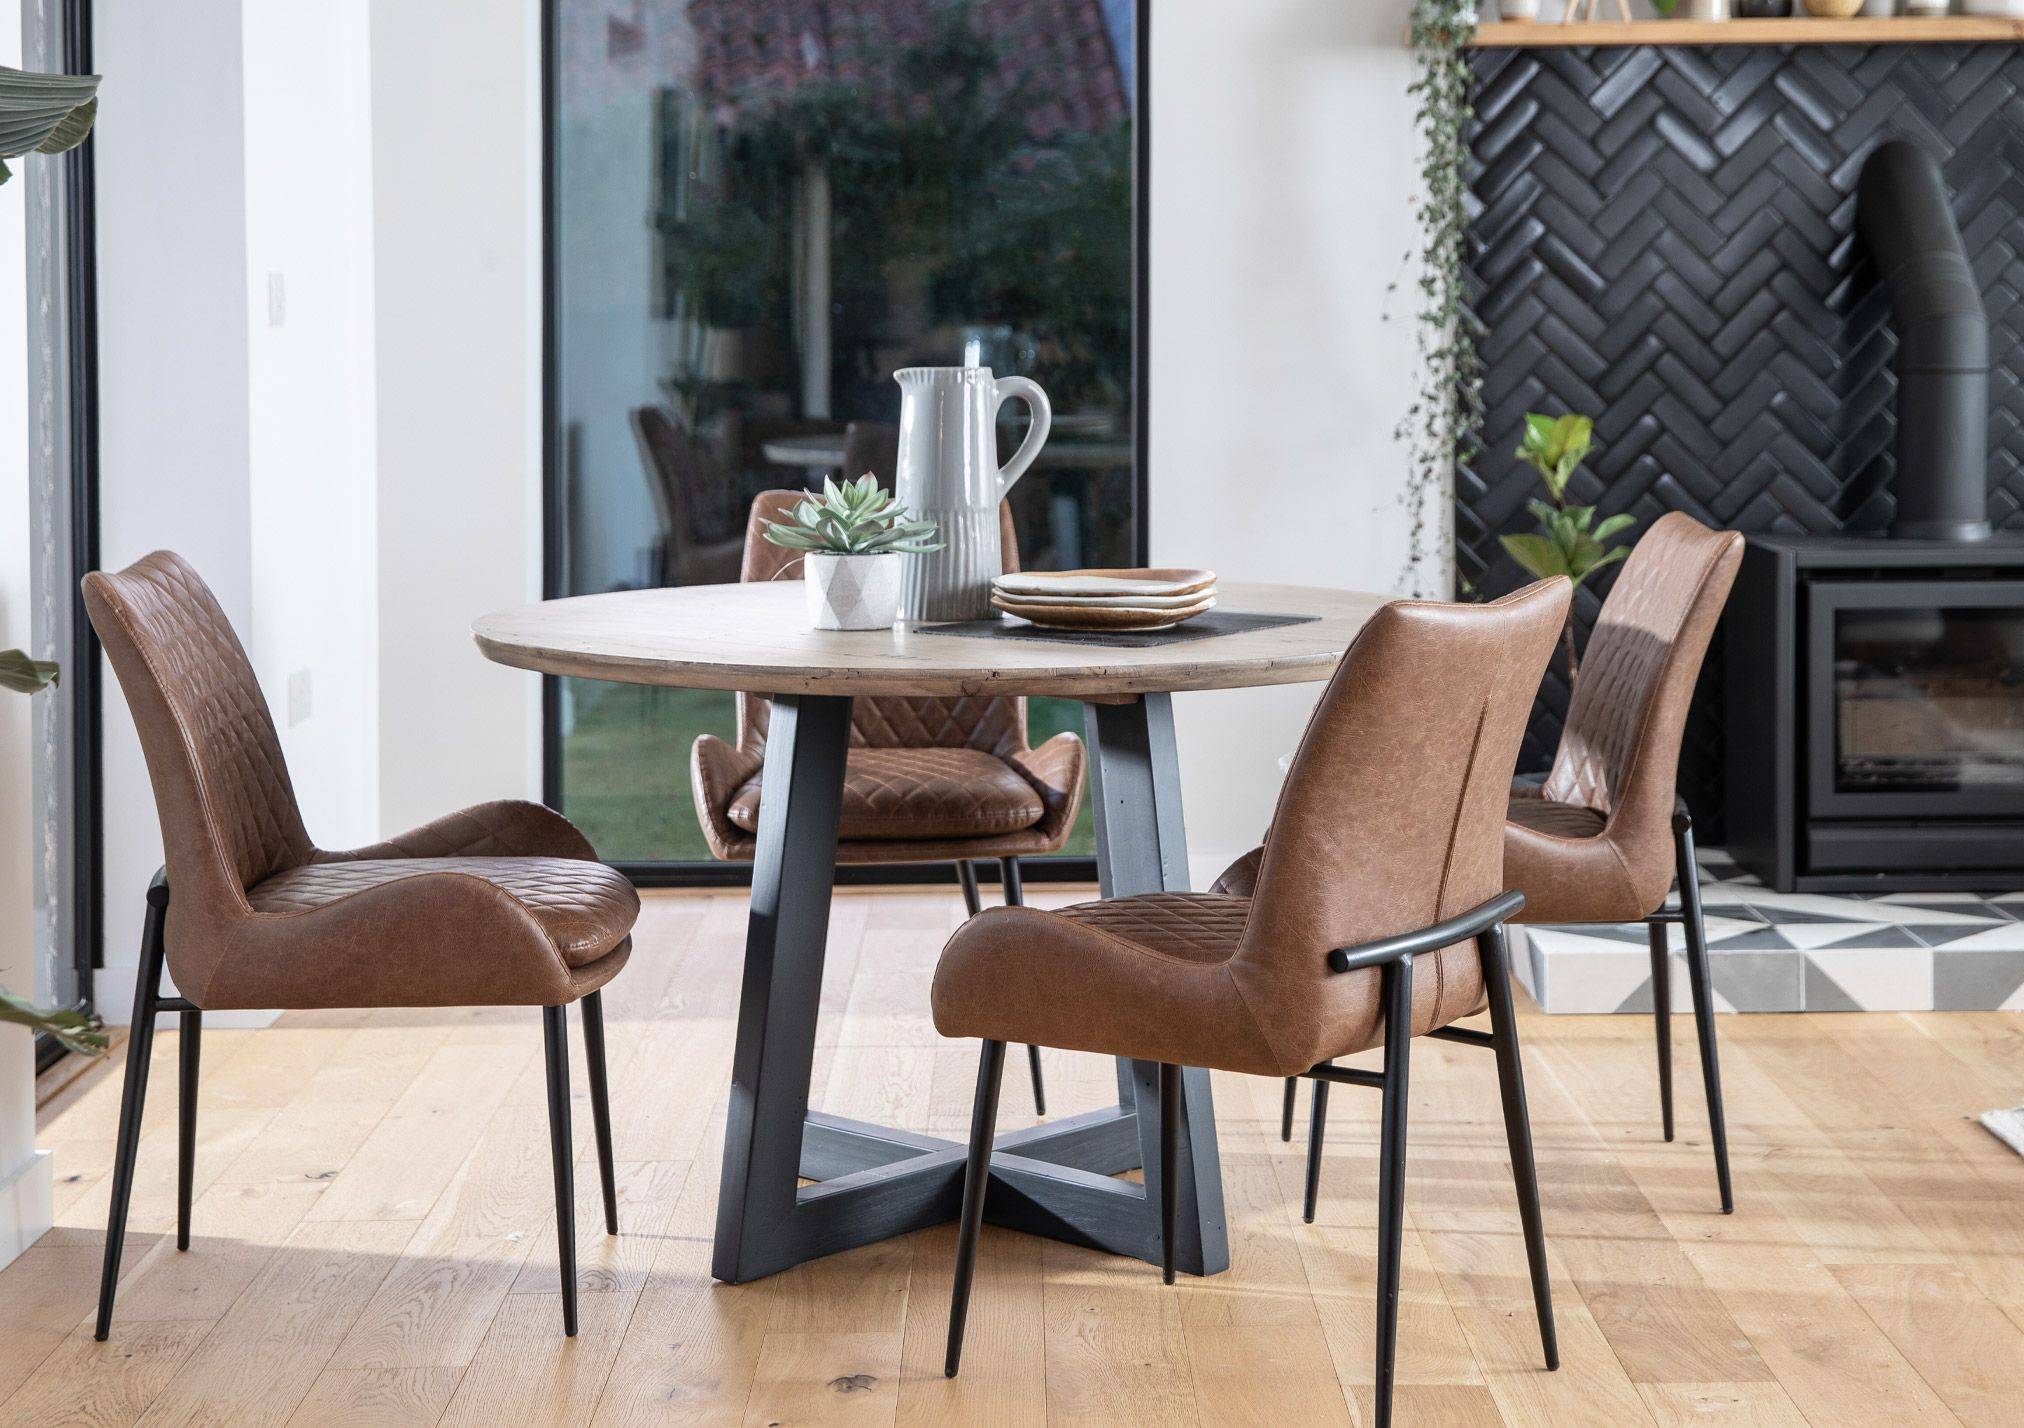 Lawrence Hill Dining Range Available Online - Shop Now